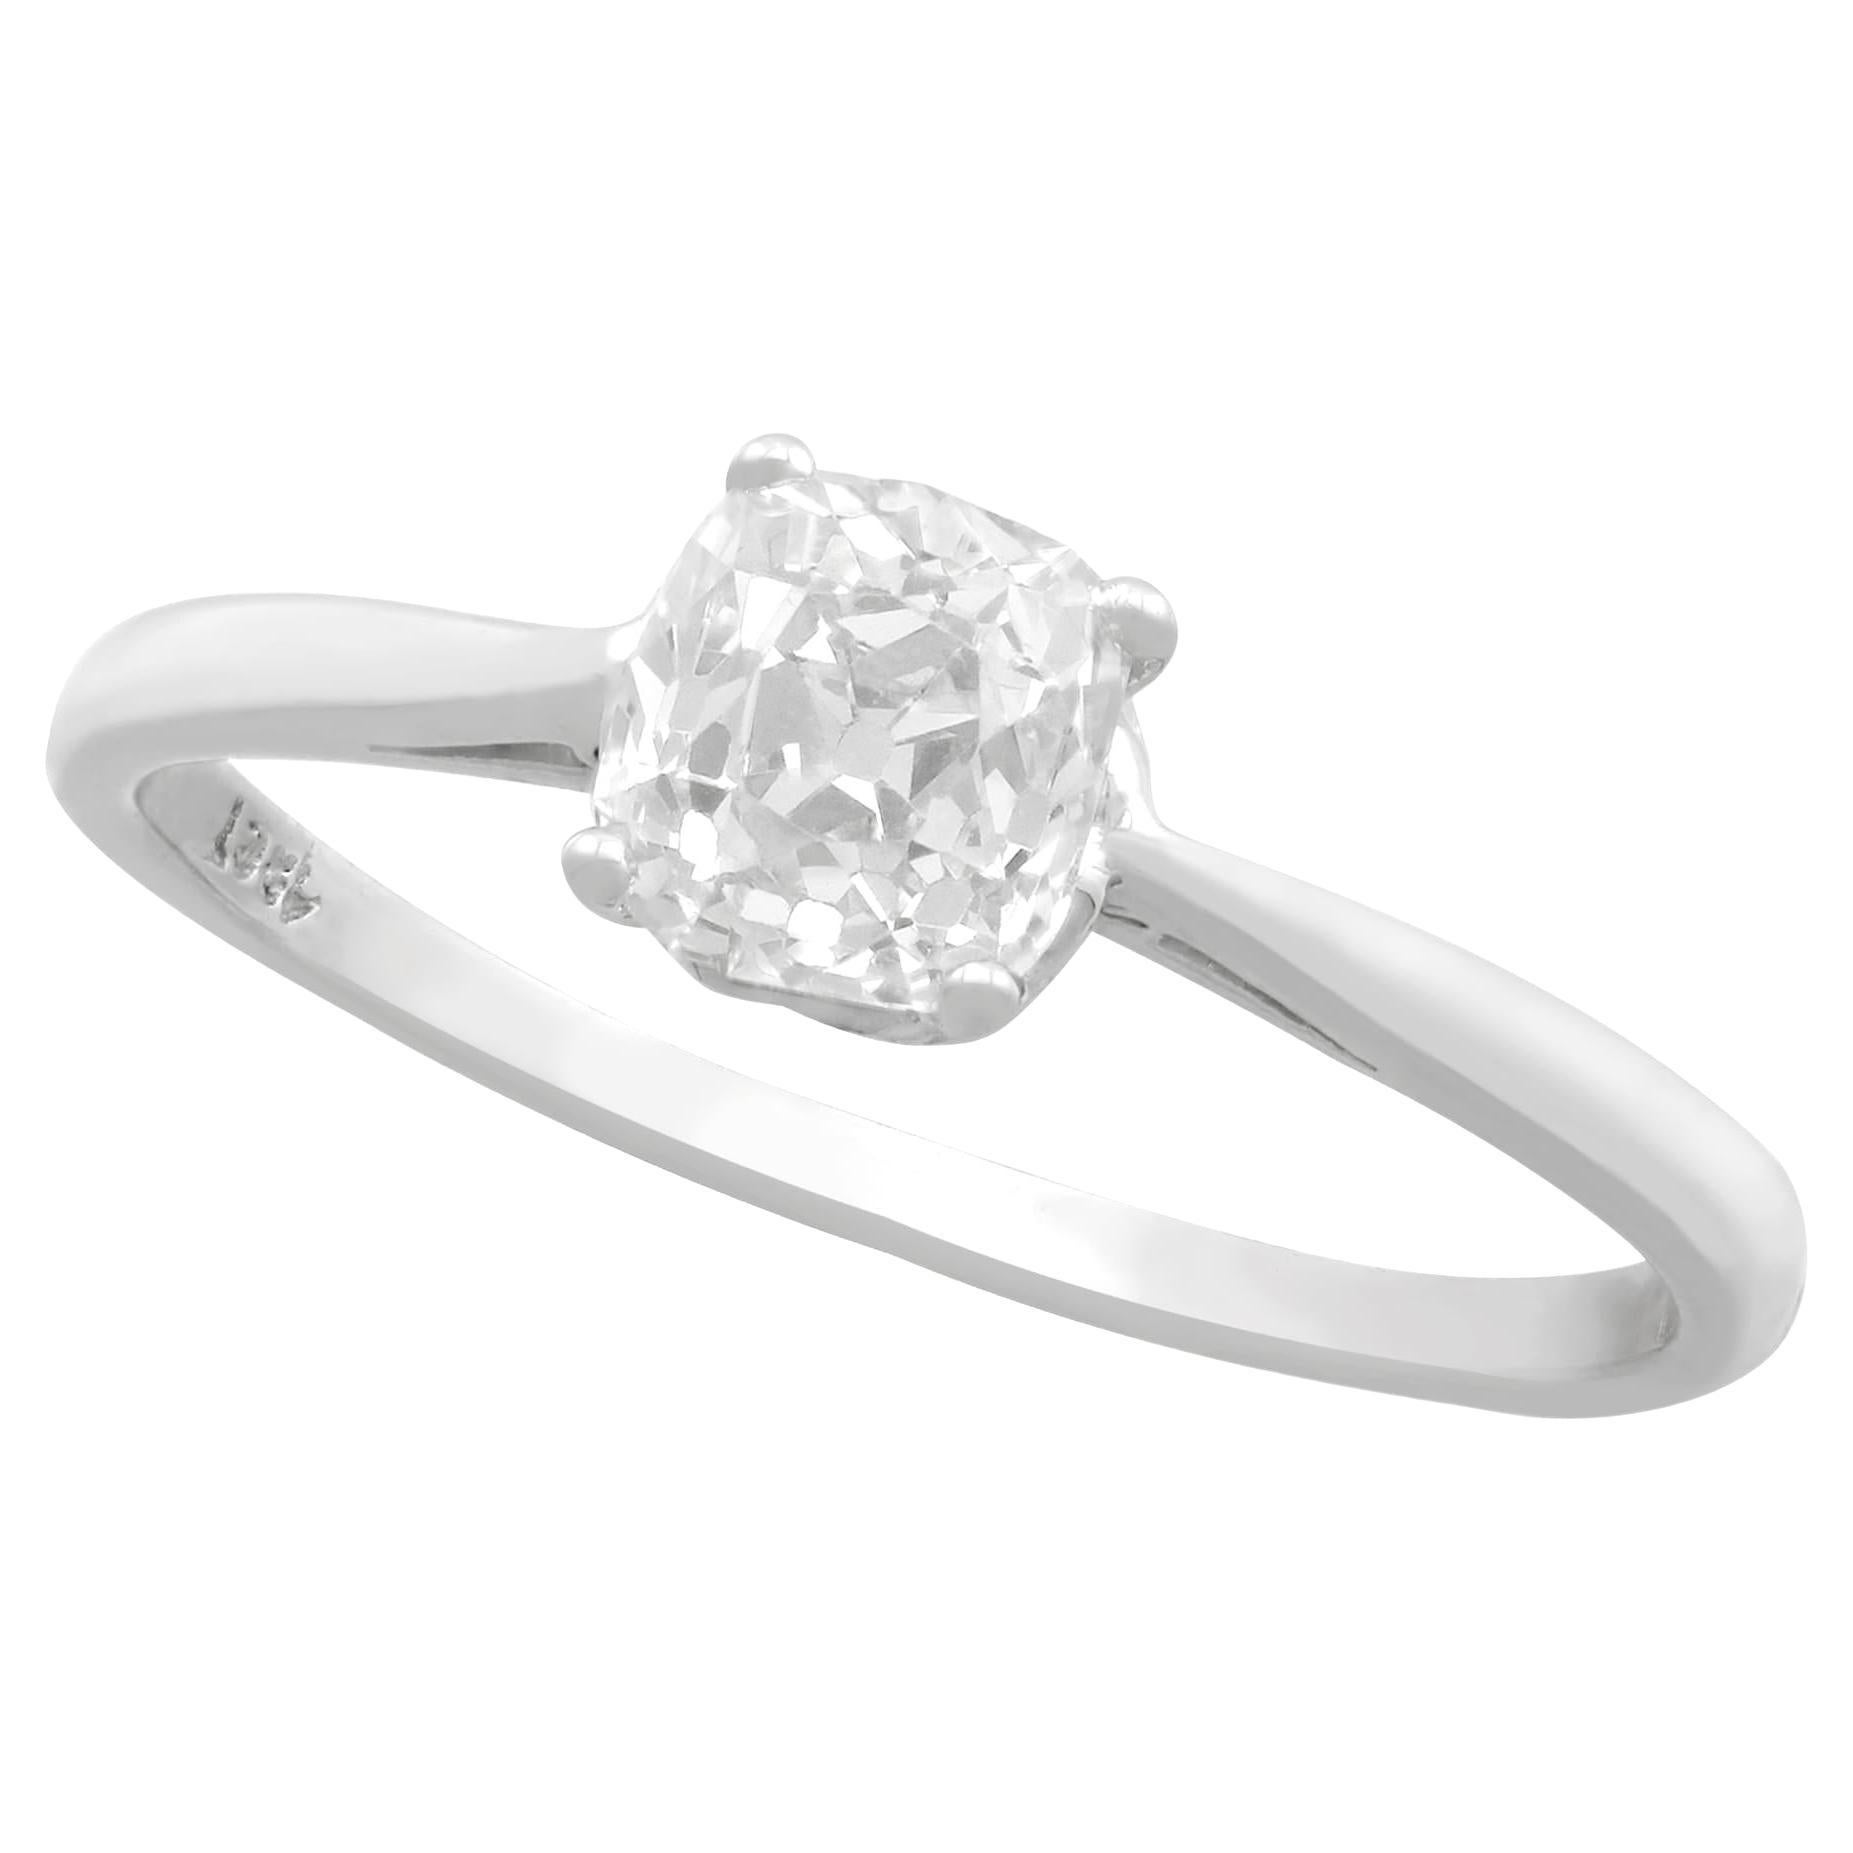 Antique 1.05 Carat Diamond and White Gold Solitaire Engagement Ring